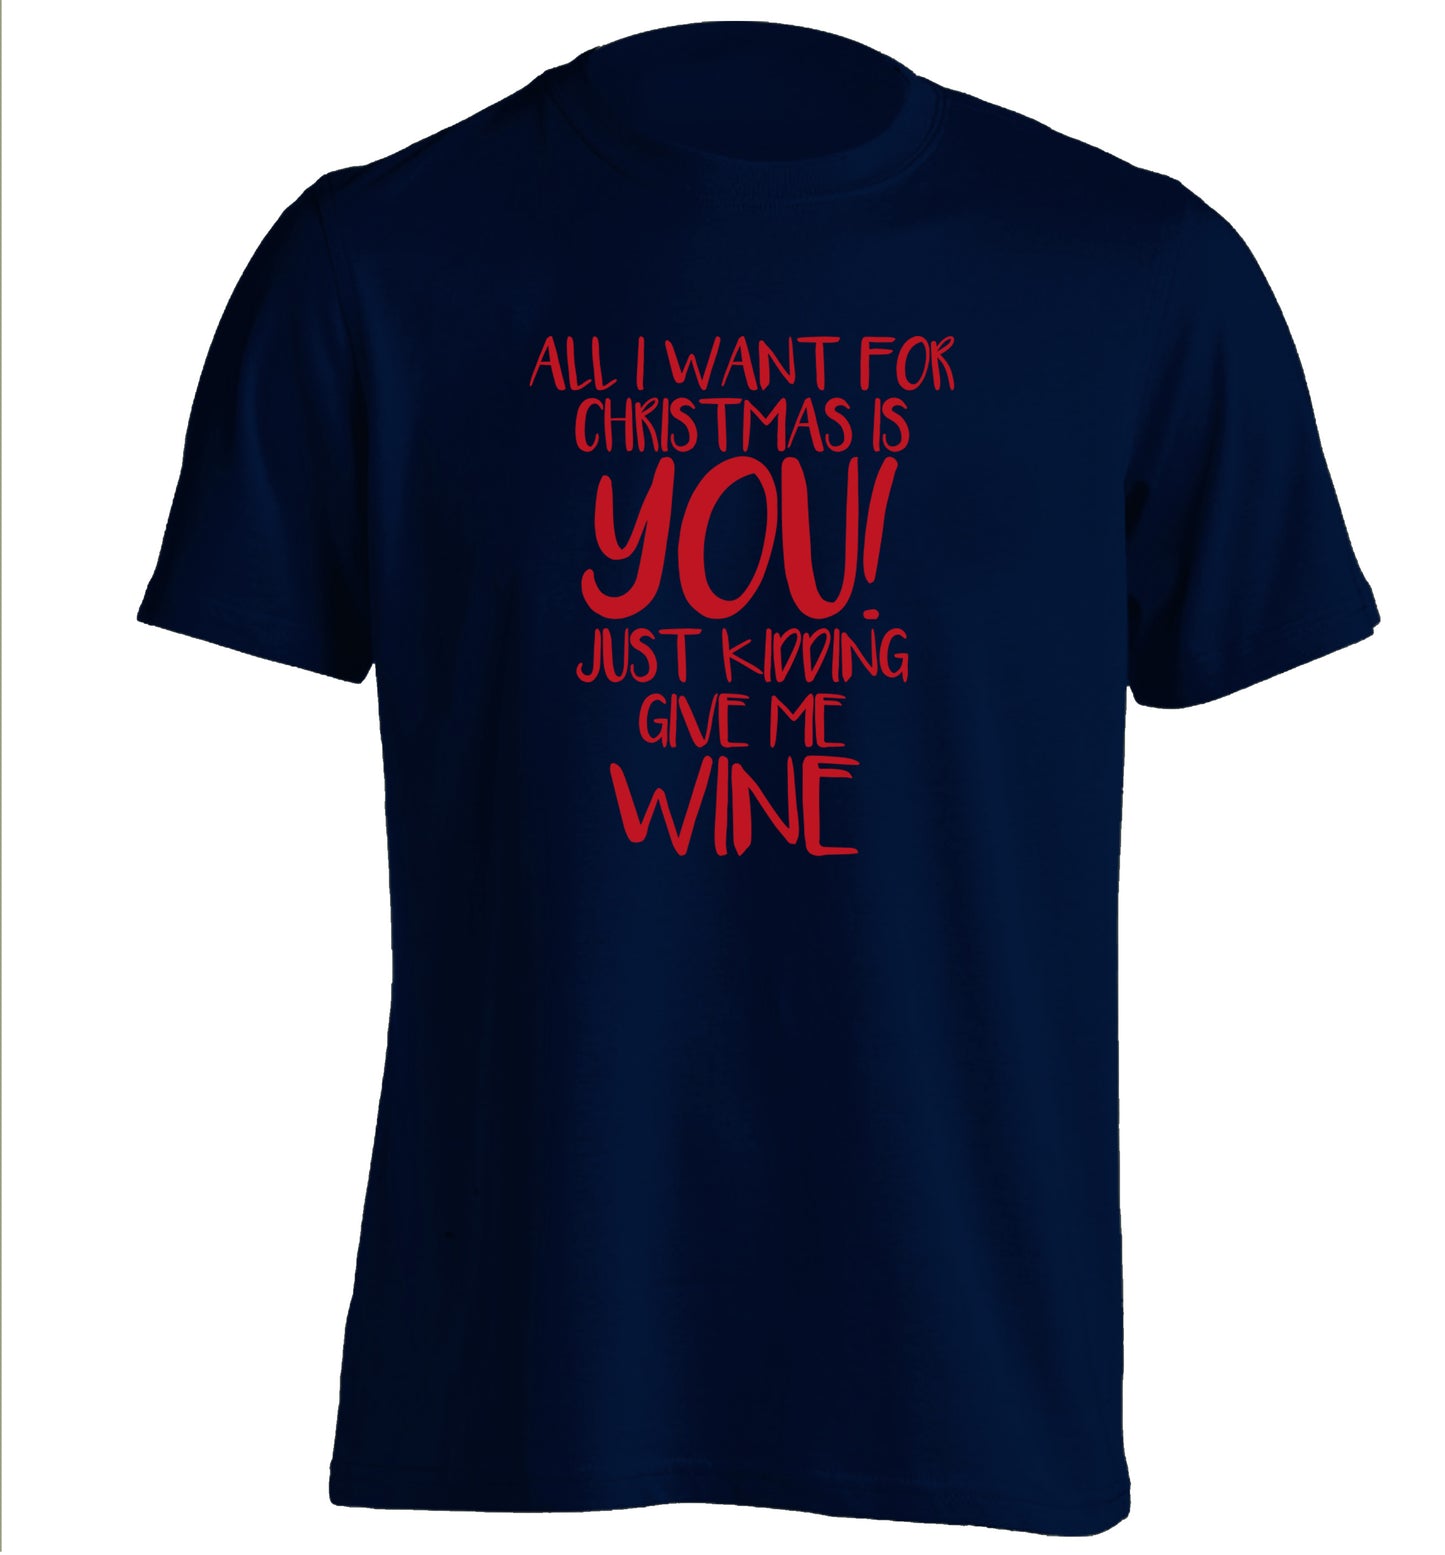 All I want for christmas is you just kidding give me the wine adults unisex navy Tshirt 2XL